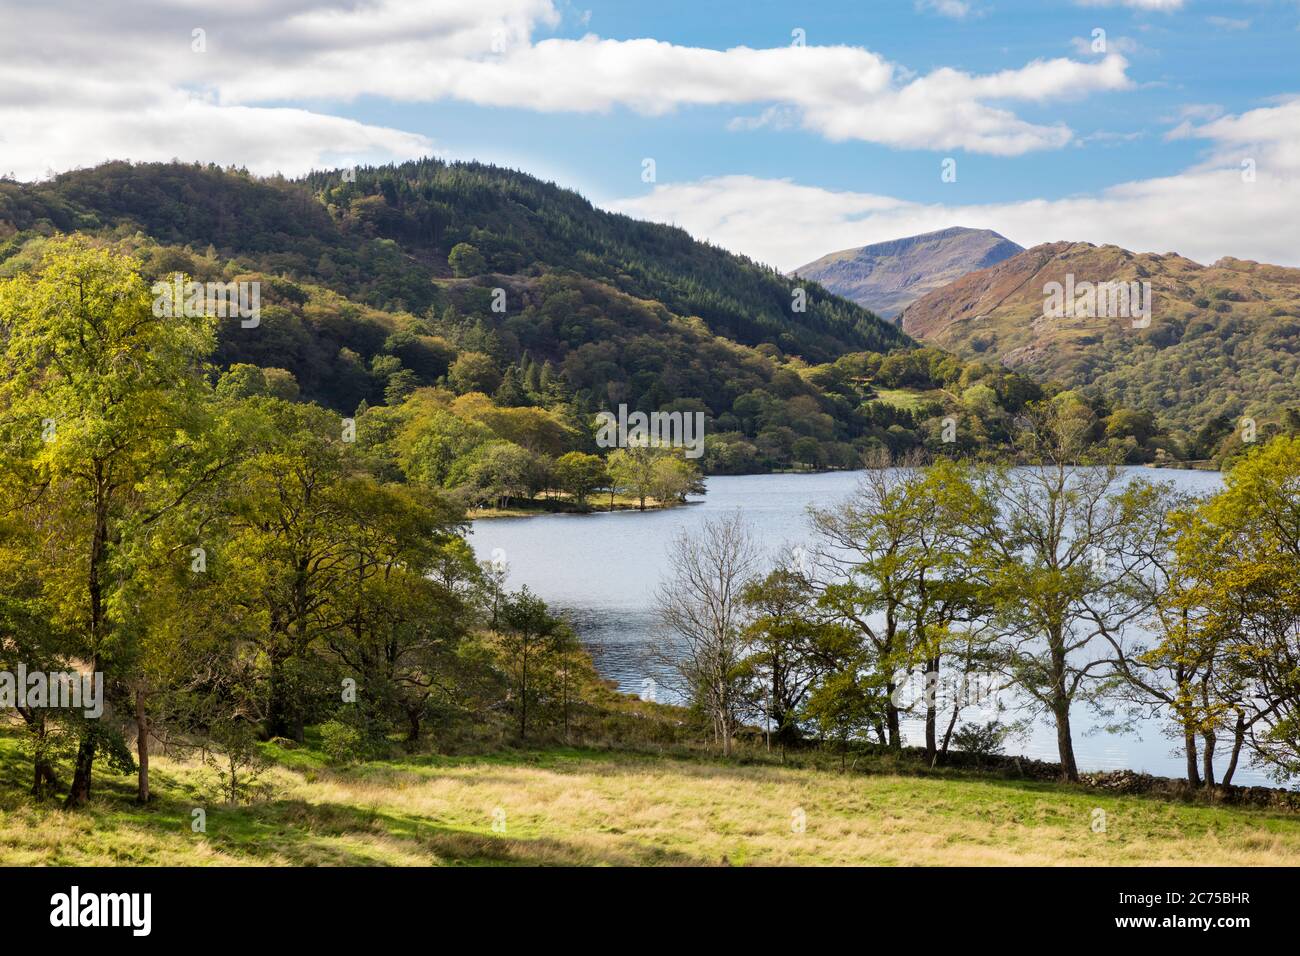 Fall Colors around the shore of Lyn Gwynant in Snowdonia National Park, Wales, UK Stock Photo